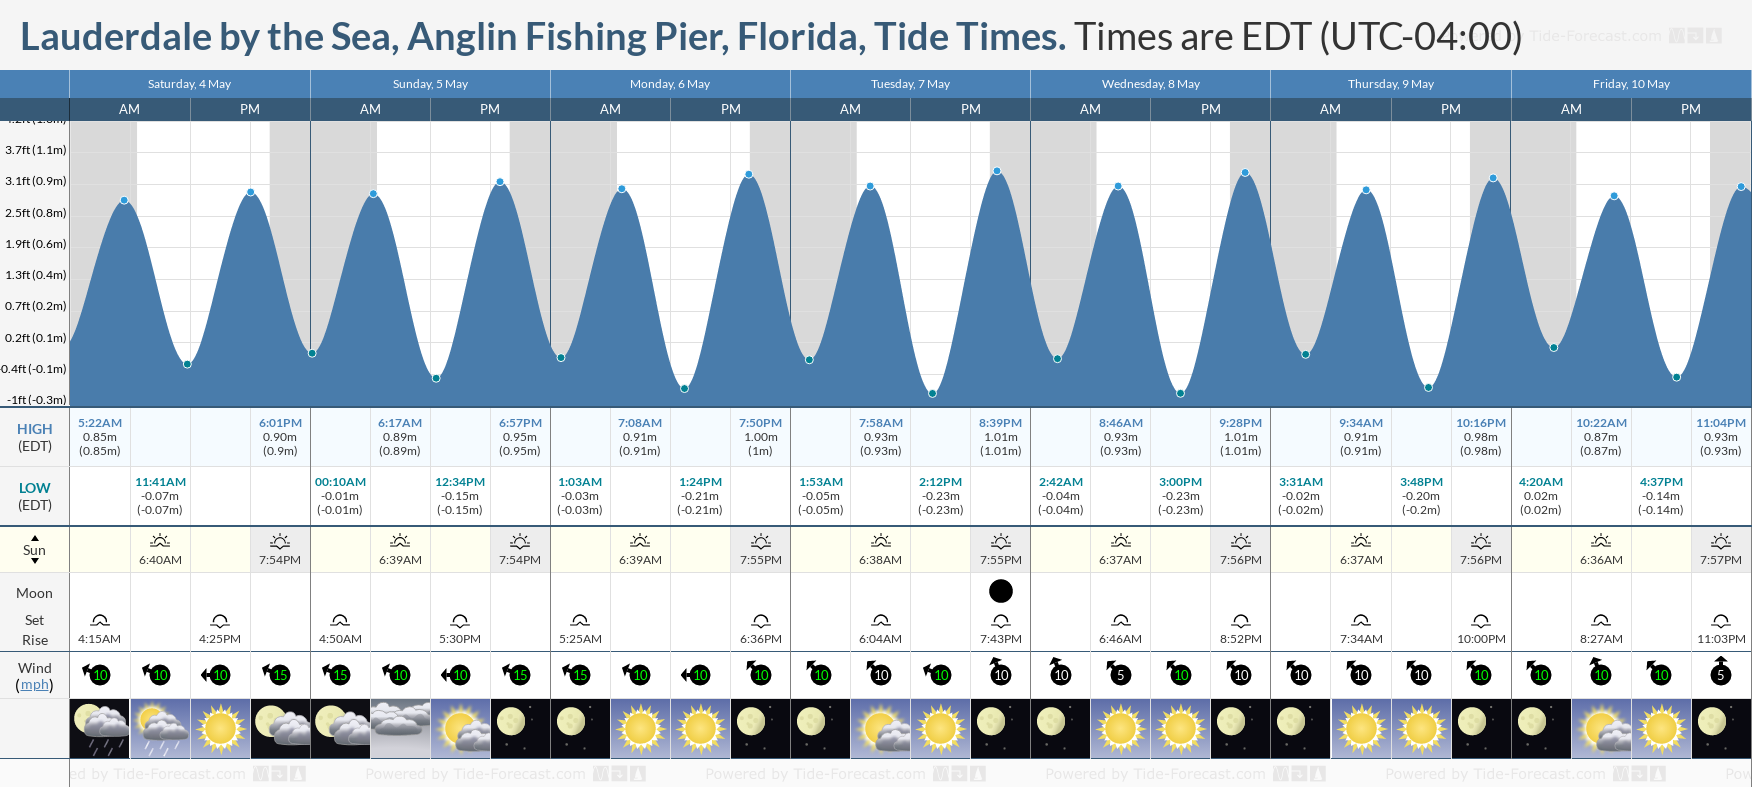 Lauderdale by the Sea, Anglin Fishing Pier, Florida Tide Chart including high and low tide tide times for the next 7 days